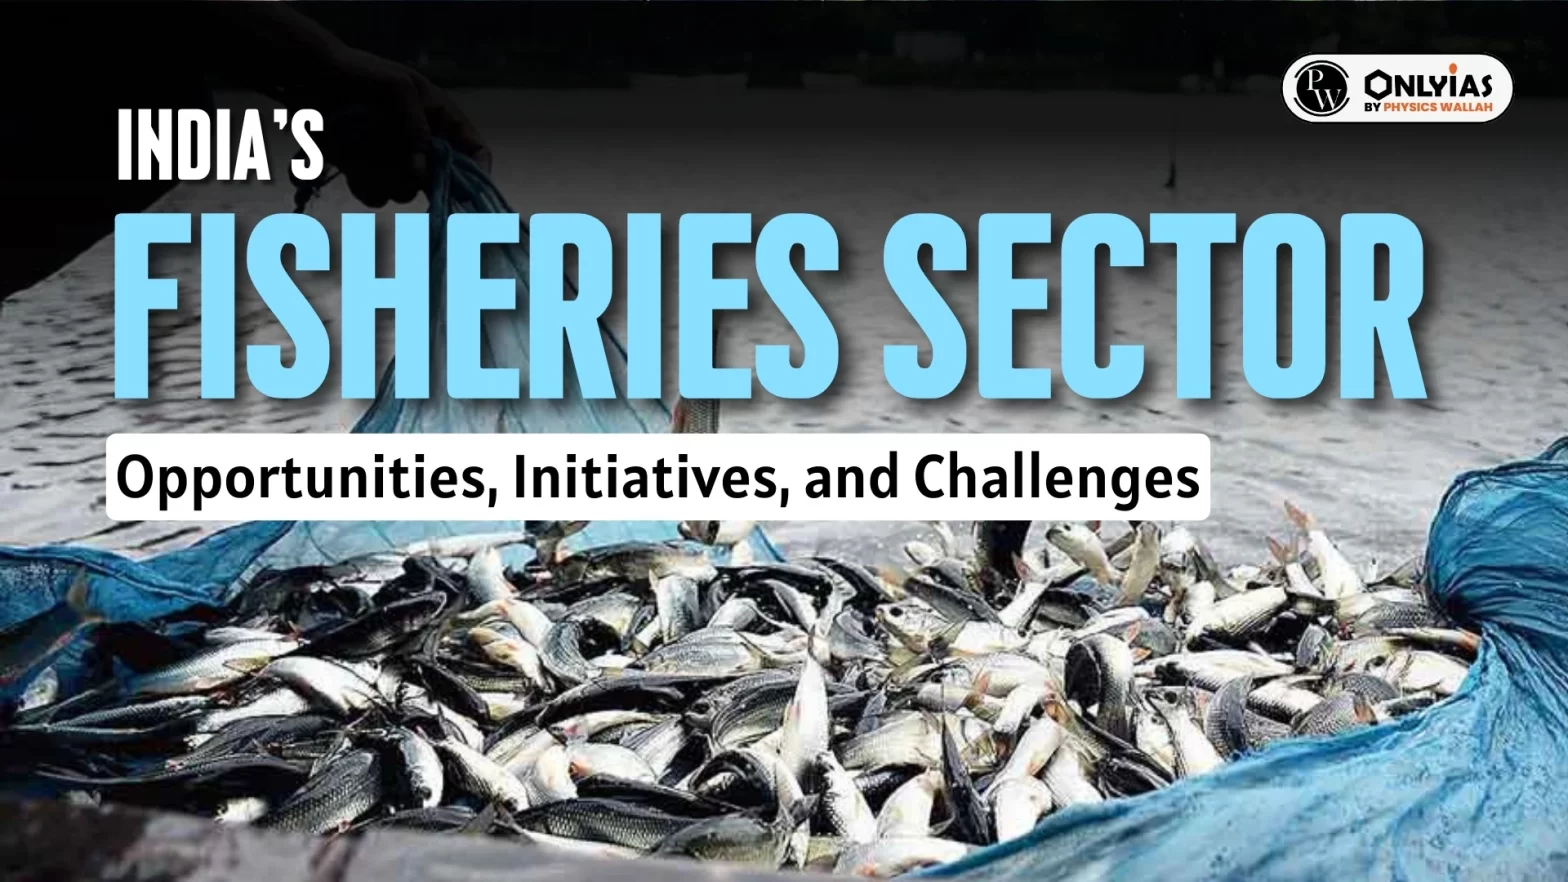 India’s Fisheries Sector: Opportunities, Initiatives, and Challenges